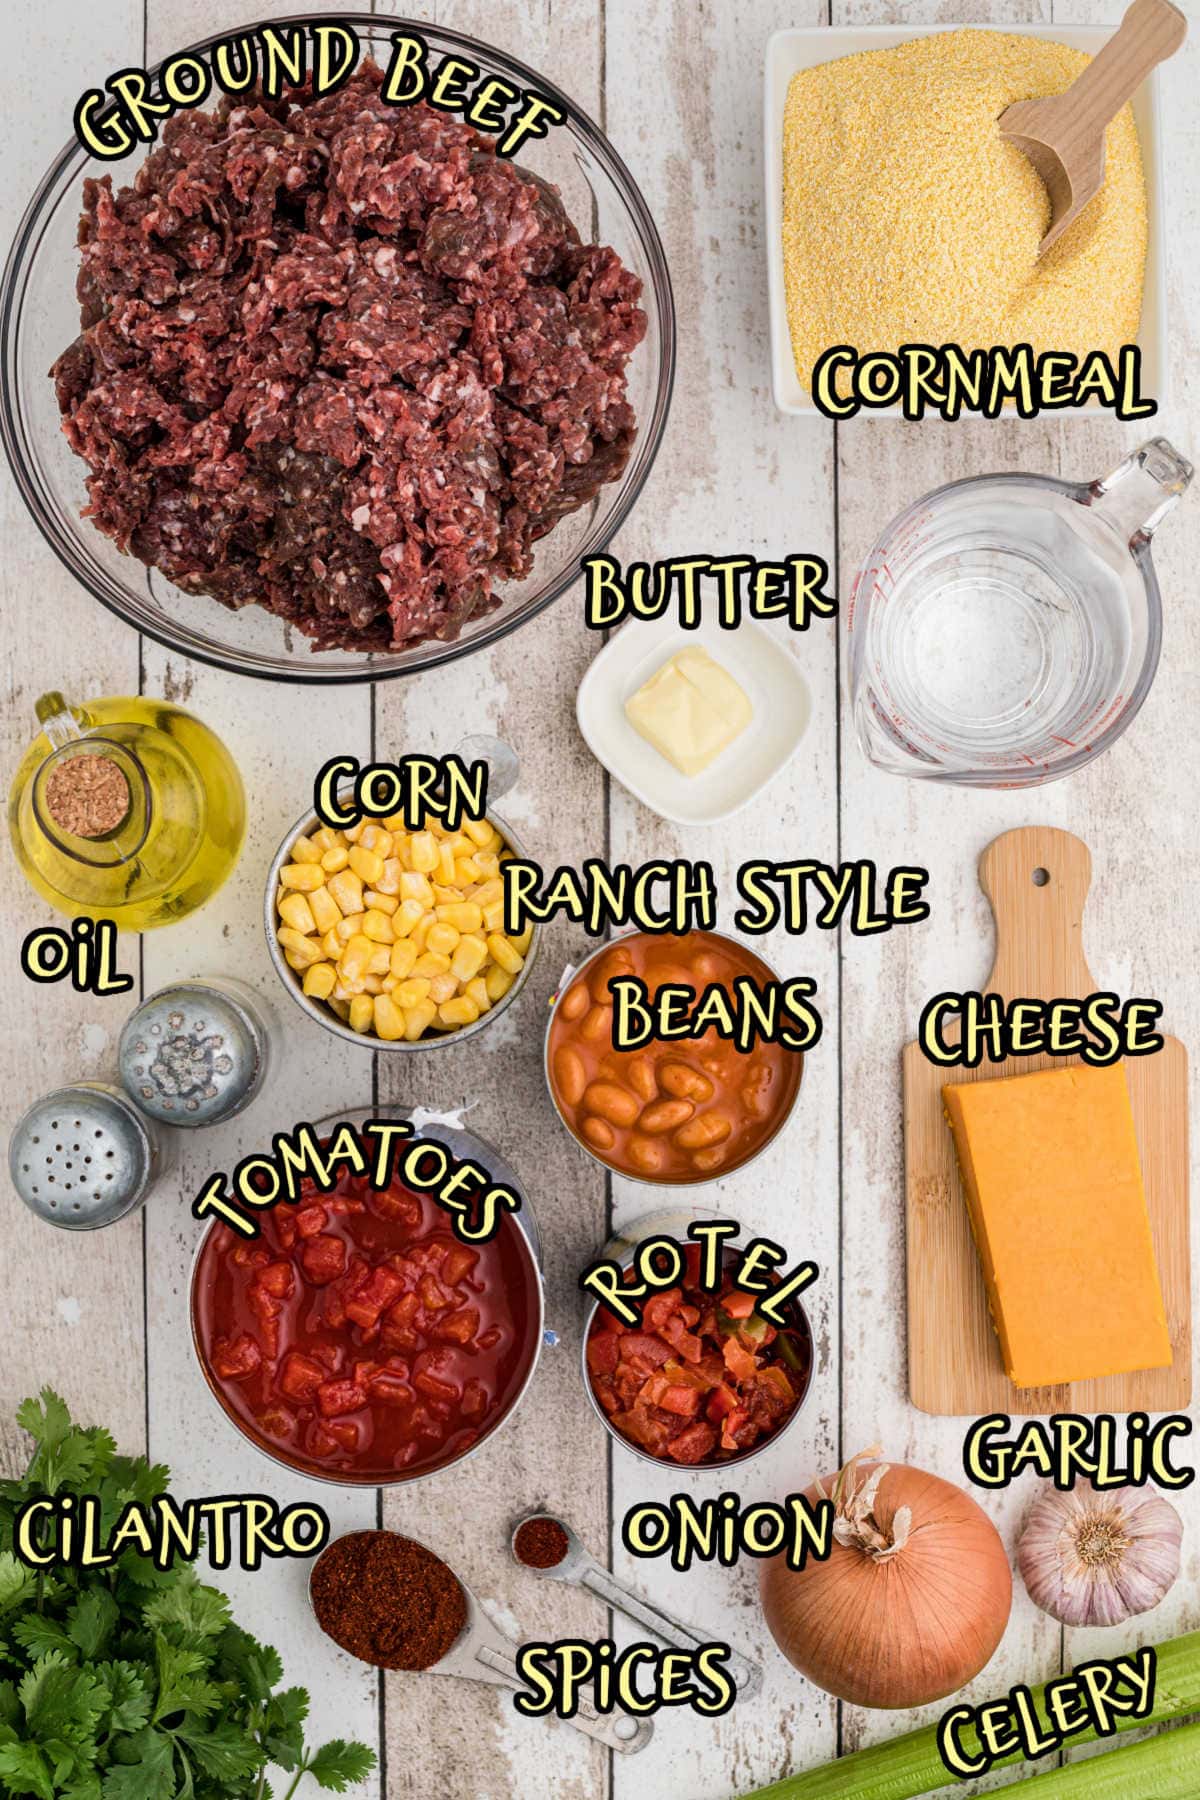 Ingredients for Tamale Pie